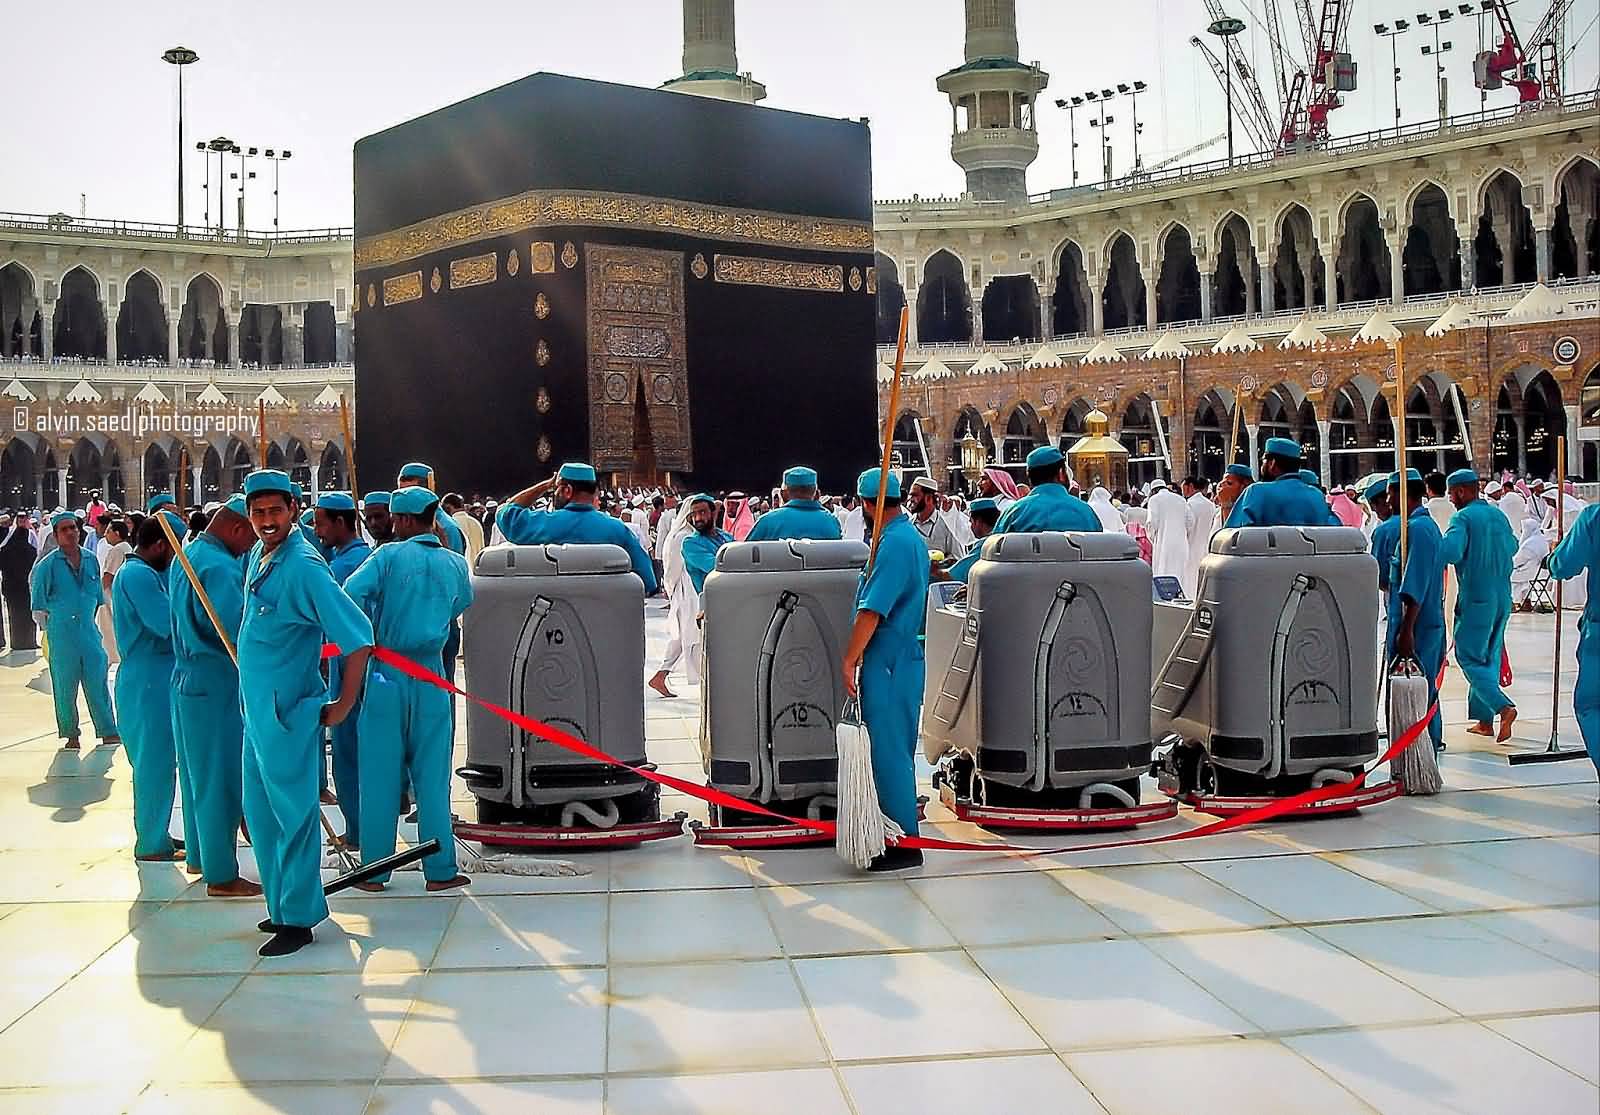 Workers Cleaning The Masjid al-Haram